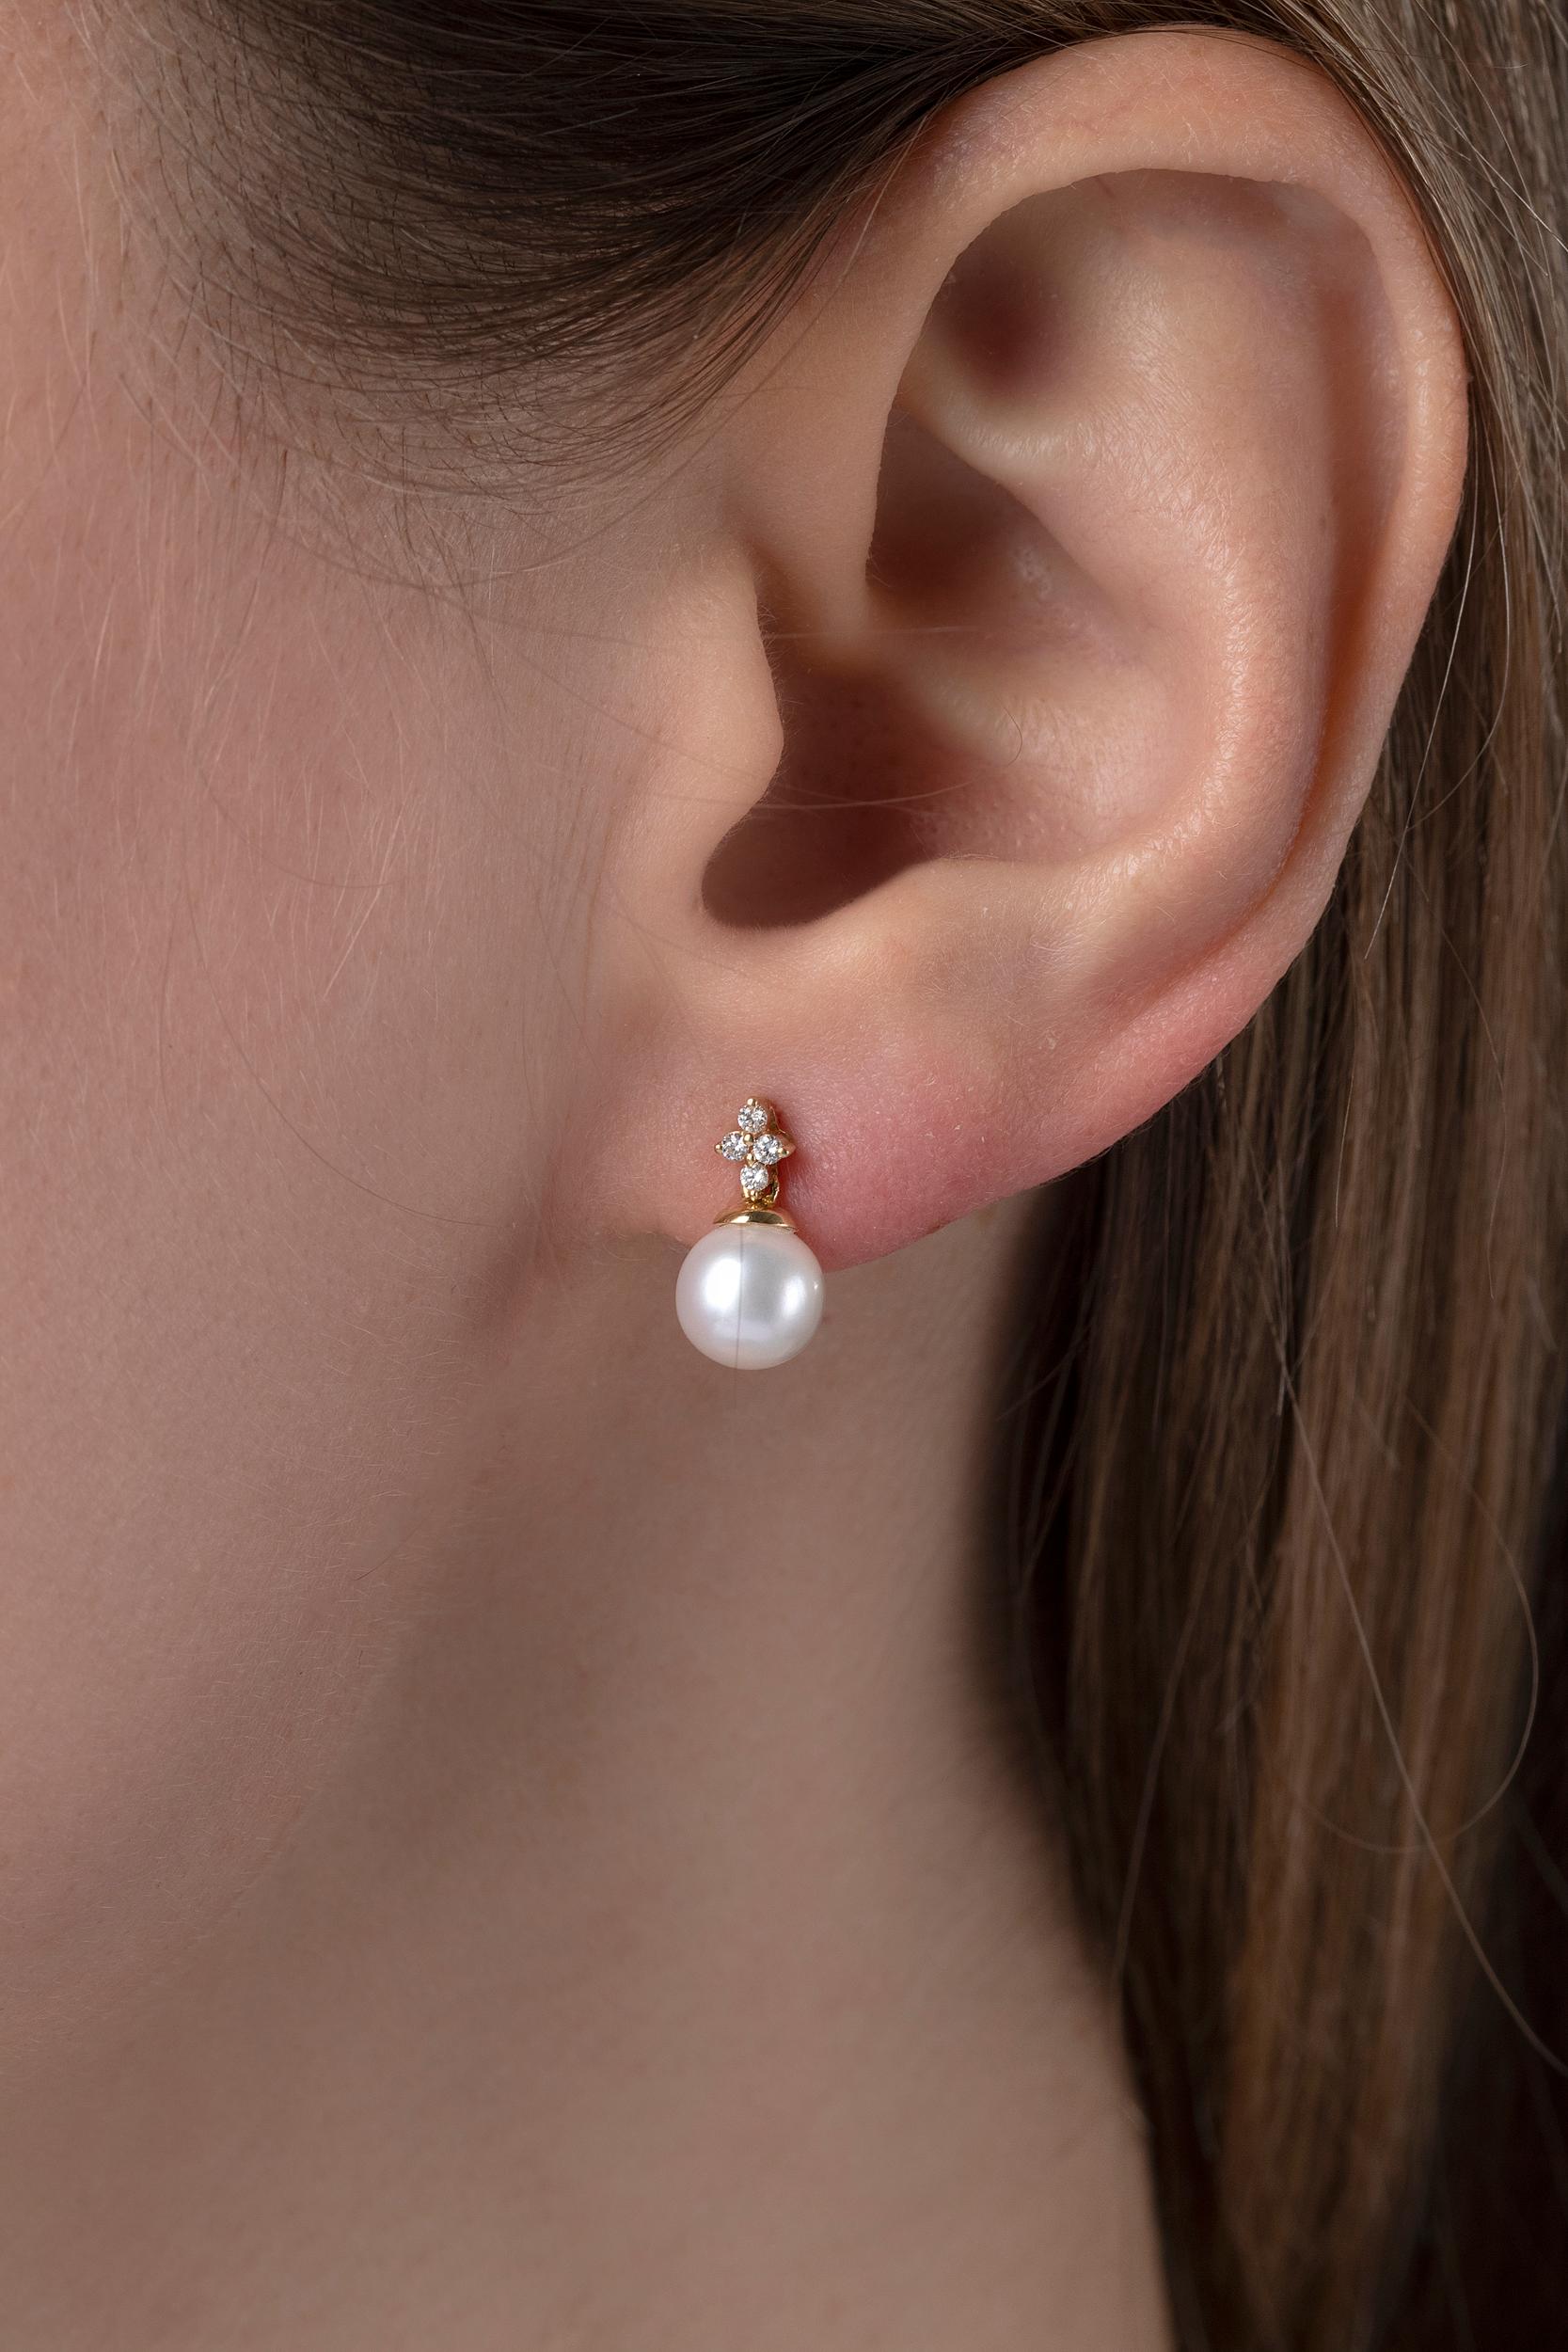 These delicate earrings by Yoko London feature lustrous Freshwater pearls beneath an intricate arrangement of diamonds. Perfect for both daytime and evening wear, these elegant earrings make a delightful addition to the finest of jewellery